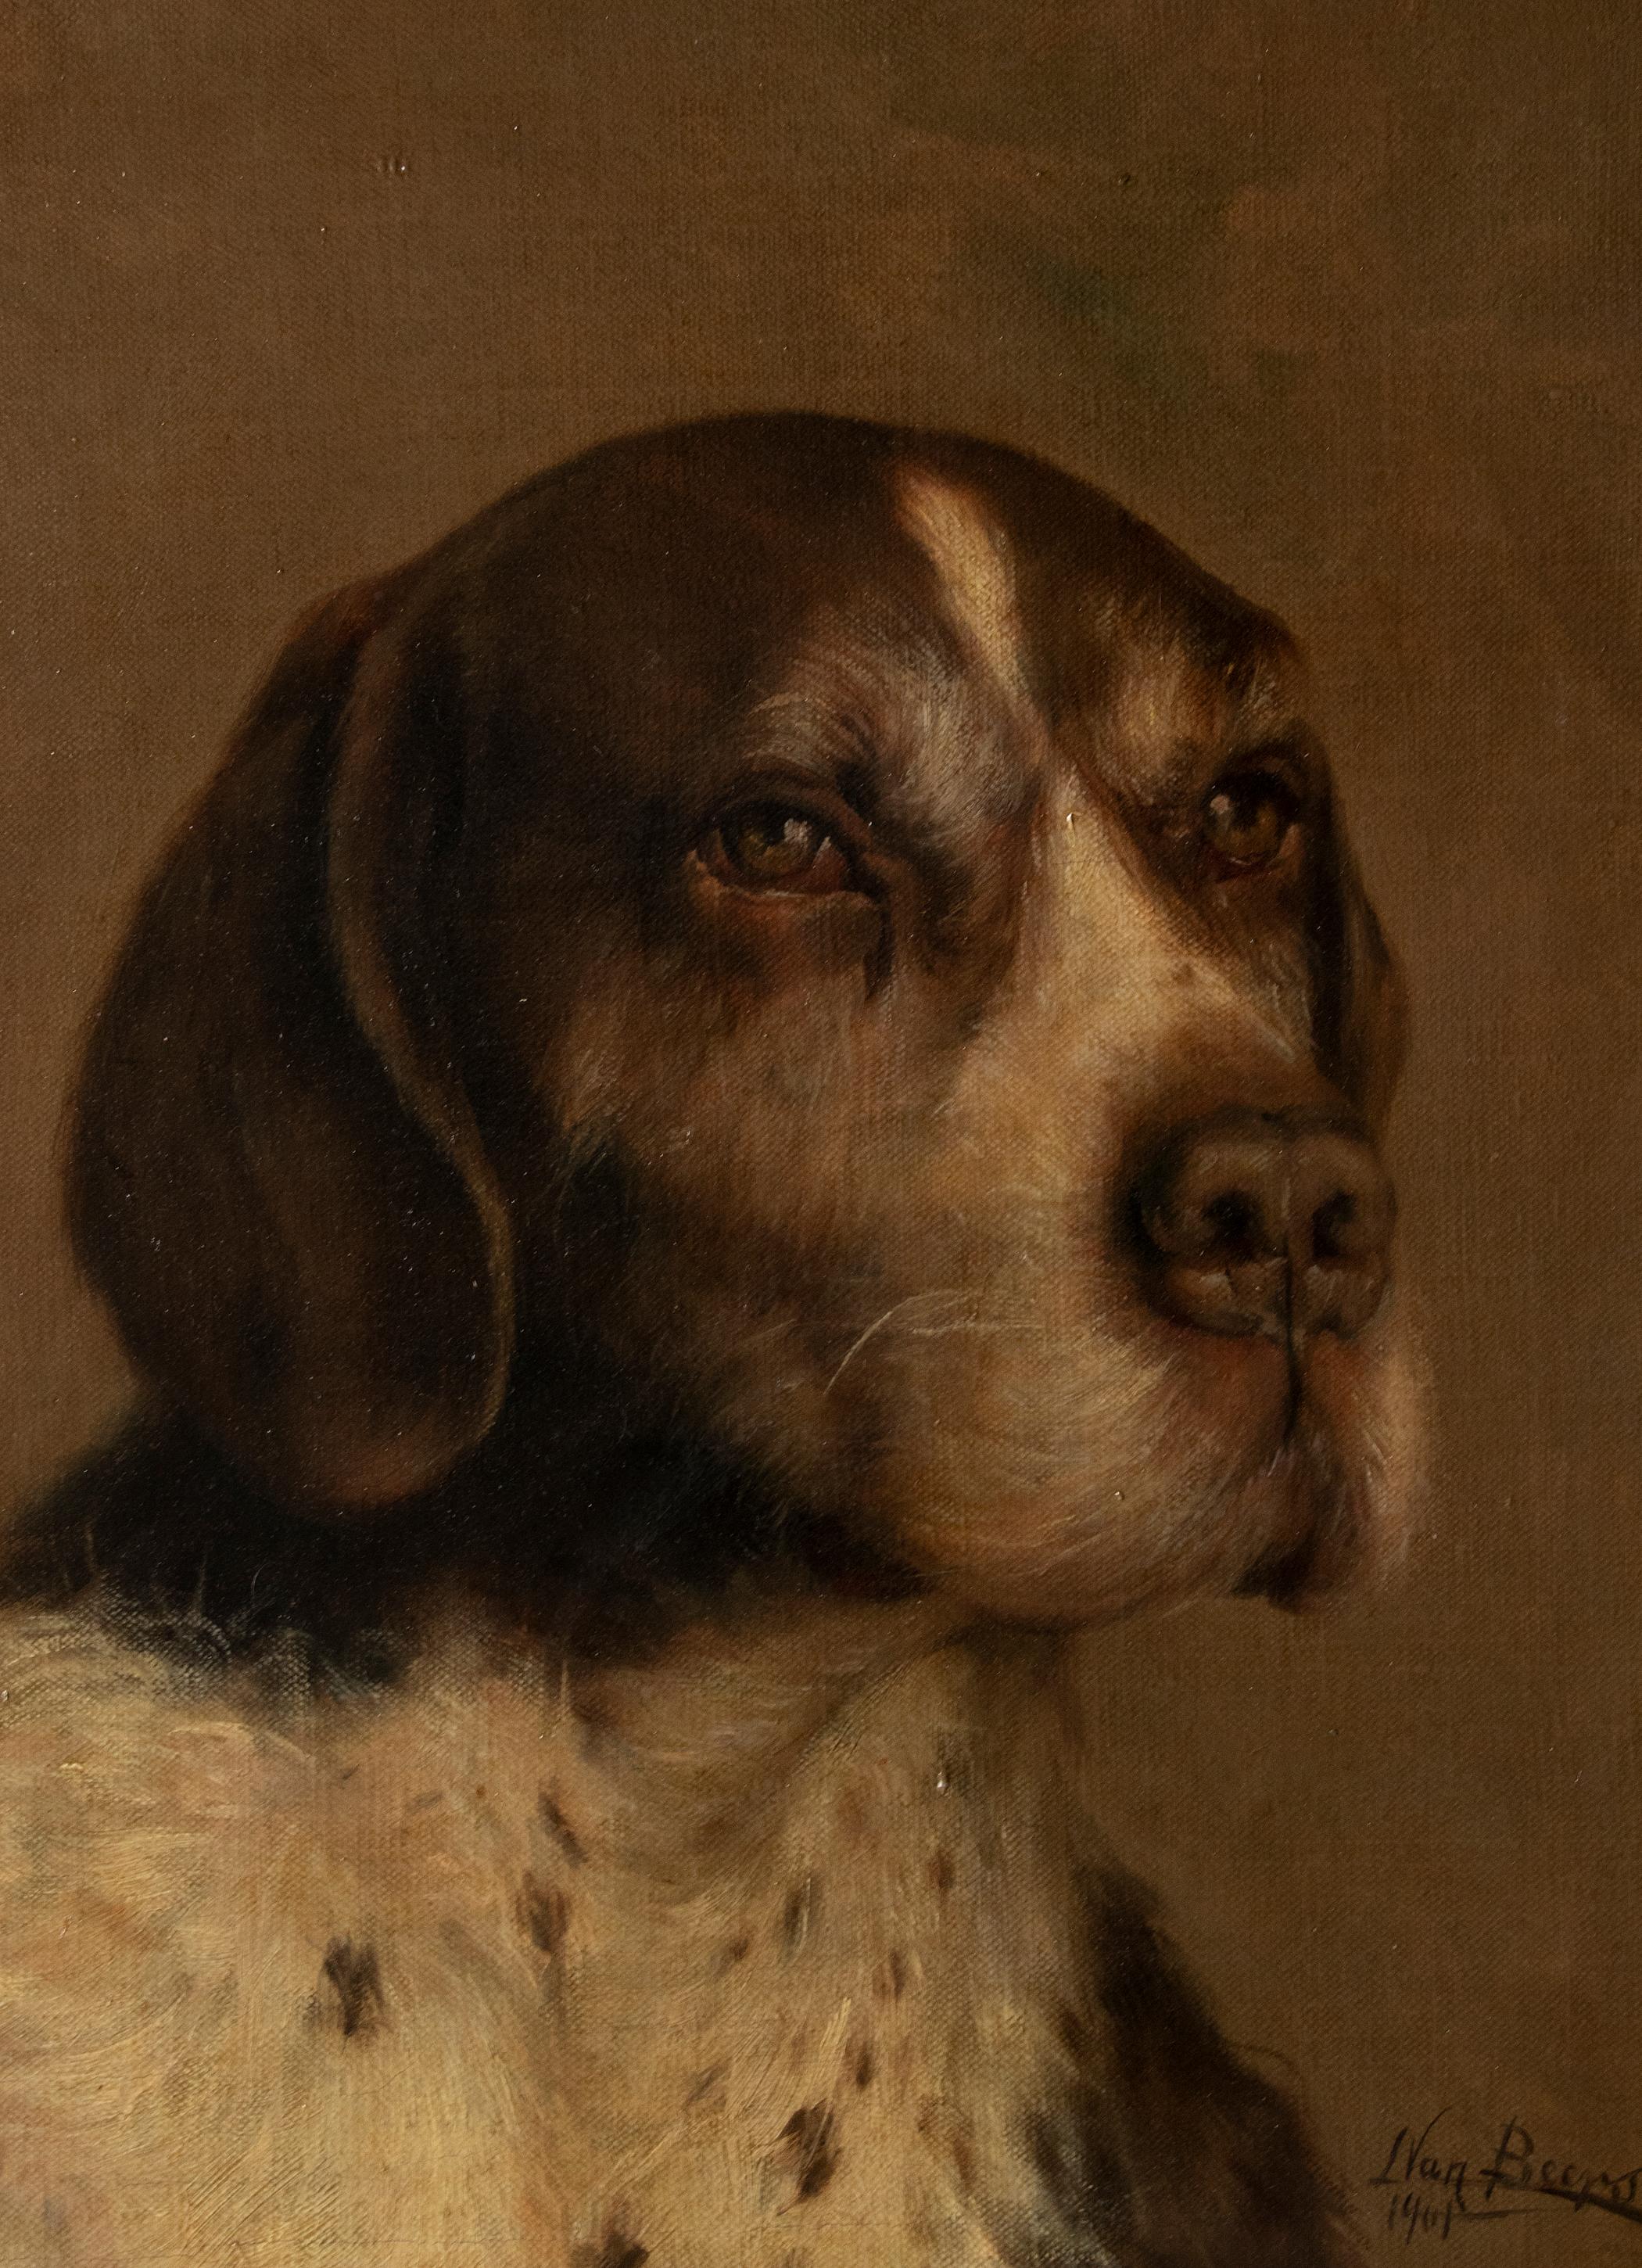 Beautiful antique portrait of a dog, the breed is a German pointer dog. The portrait gives a loving and true-to-life representation of the dog; his posture, his fur, his eyes, it exactly reflects the relationship between man and dog.
The painting